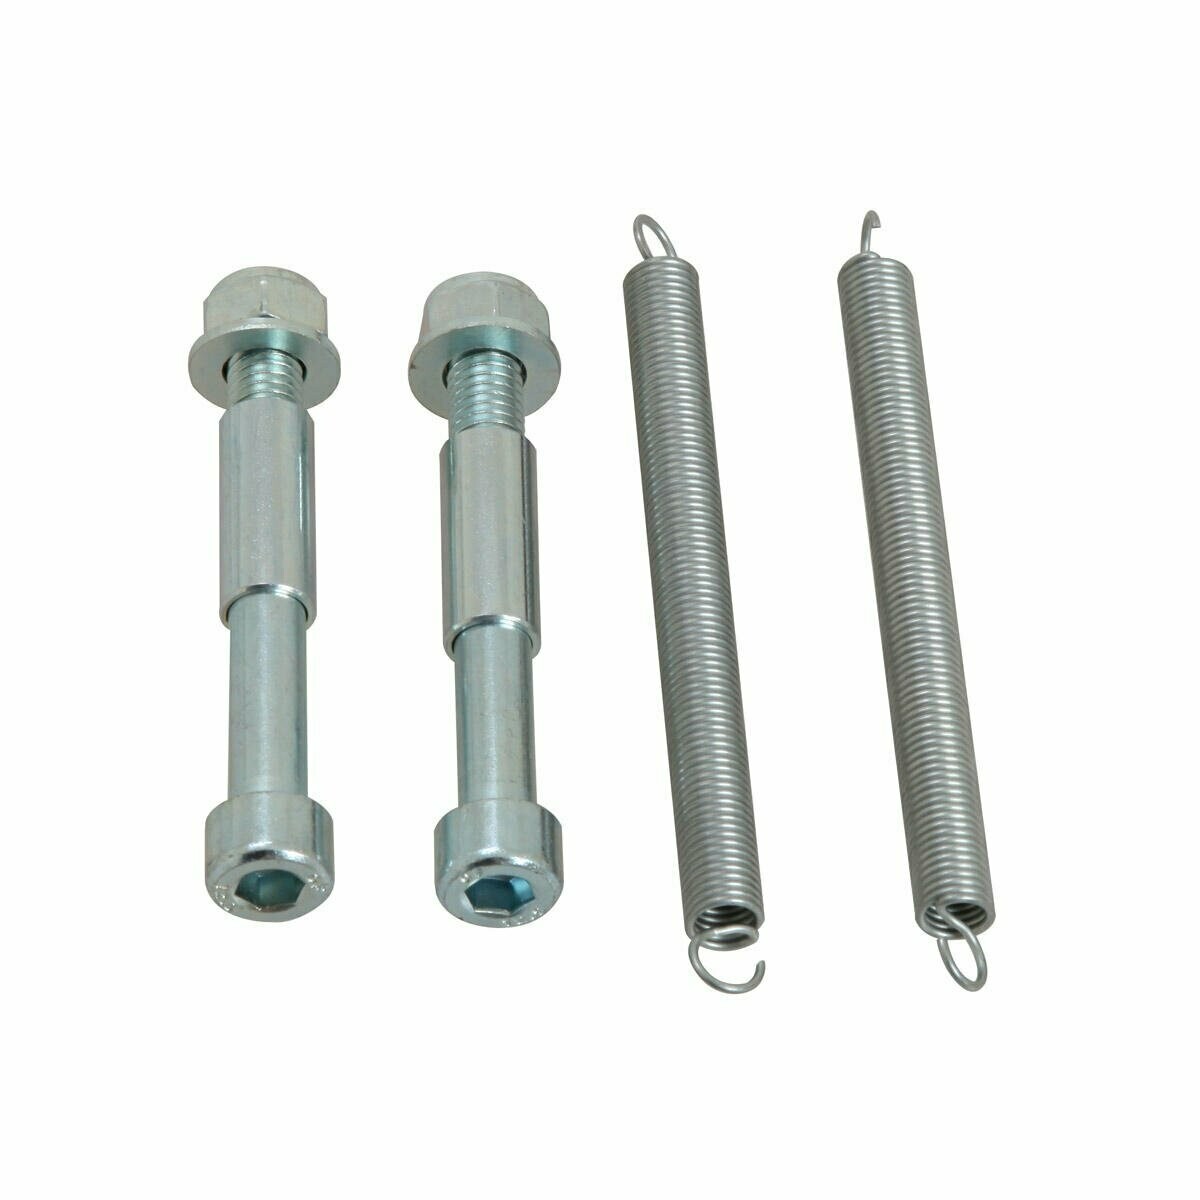 Mini-Kart Springs and Screws Kit for steel Pedals